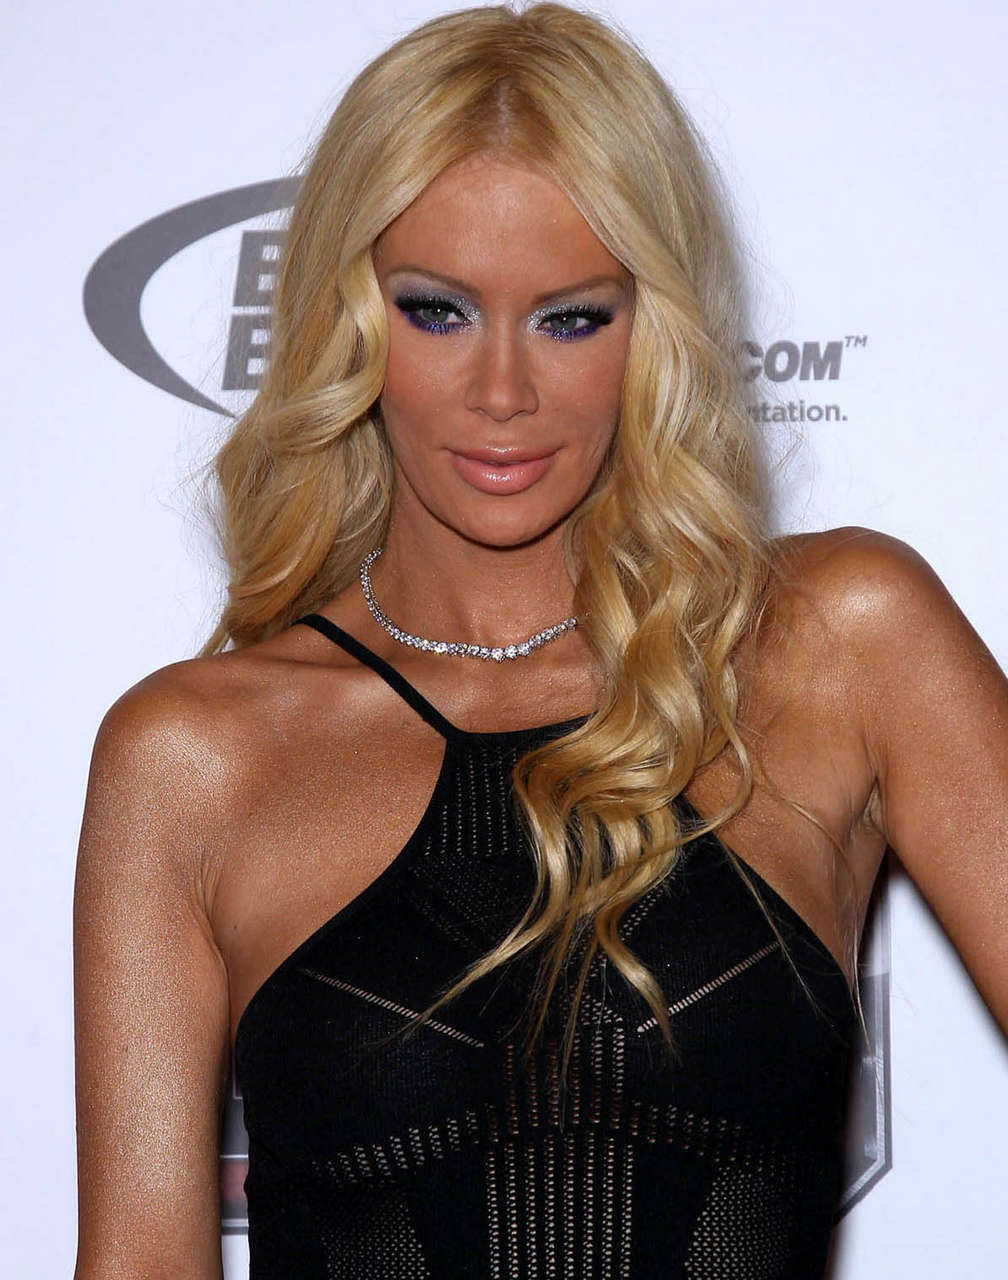 Jenna Jameson 4th Annual Fighters Only World Mixed Martial Arts Awards Las Vegas